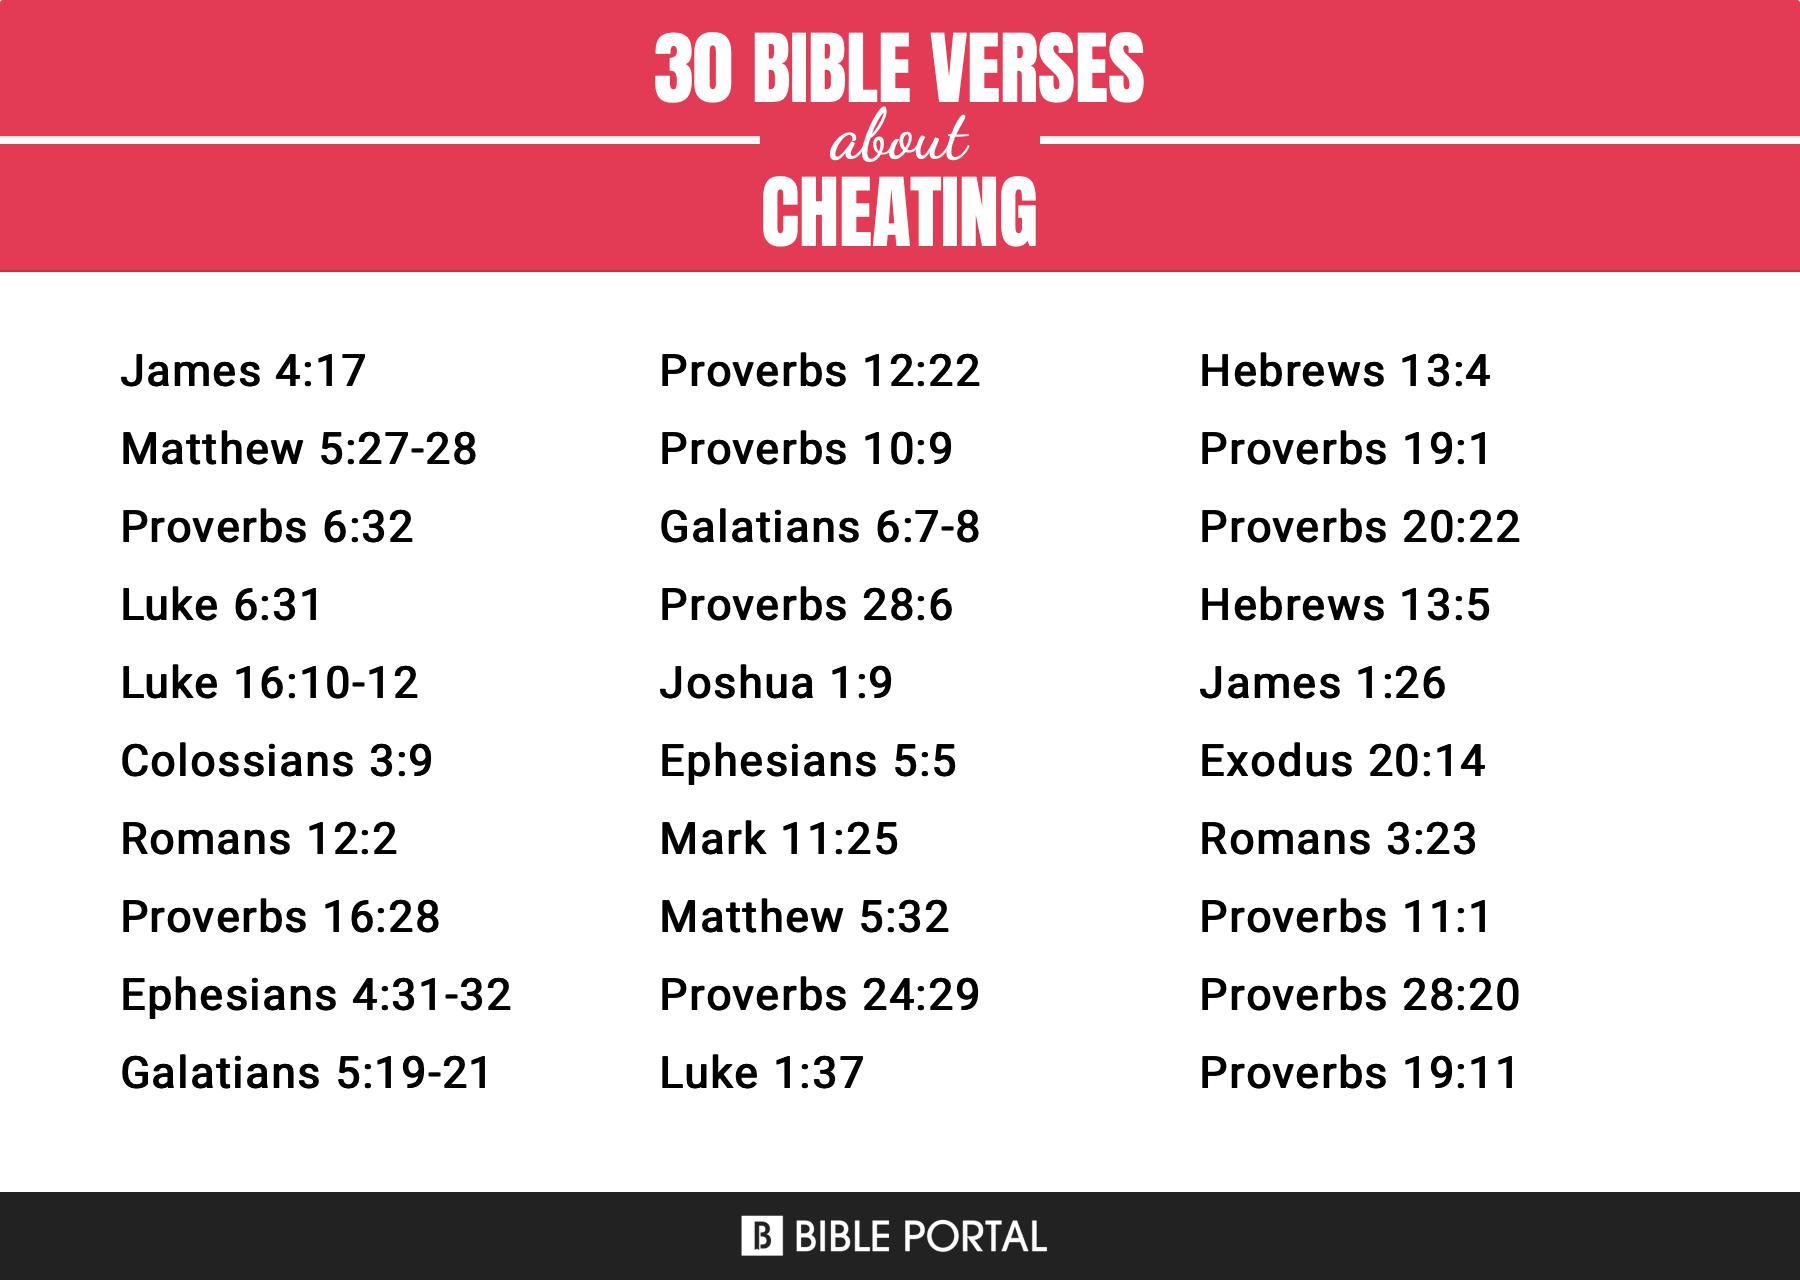 What Does the Bible Say about Cheating?